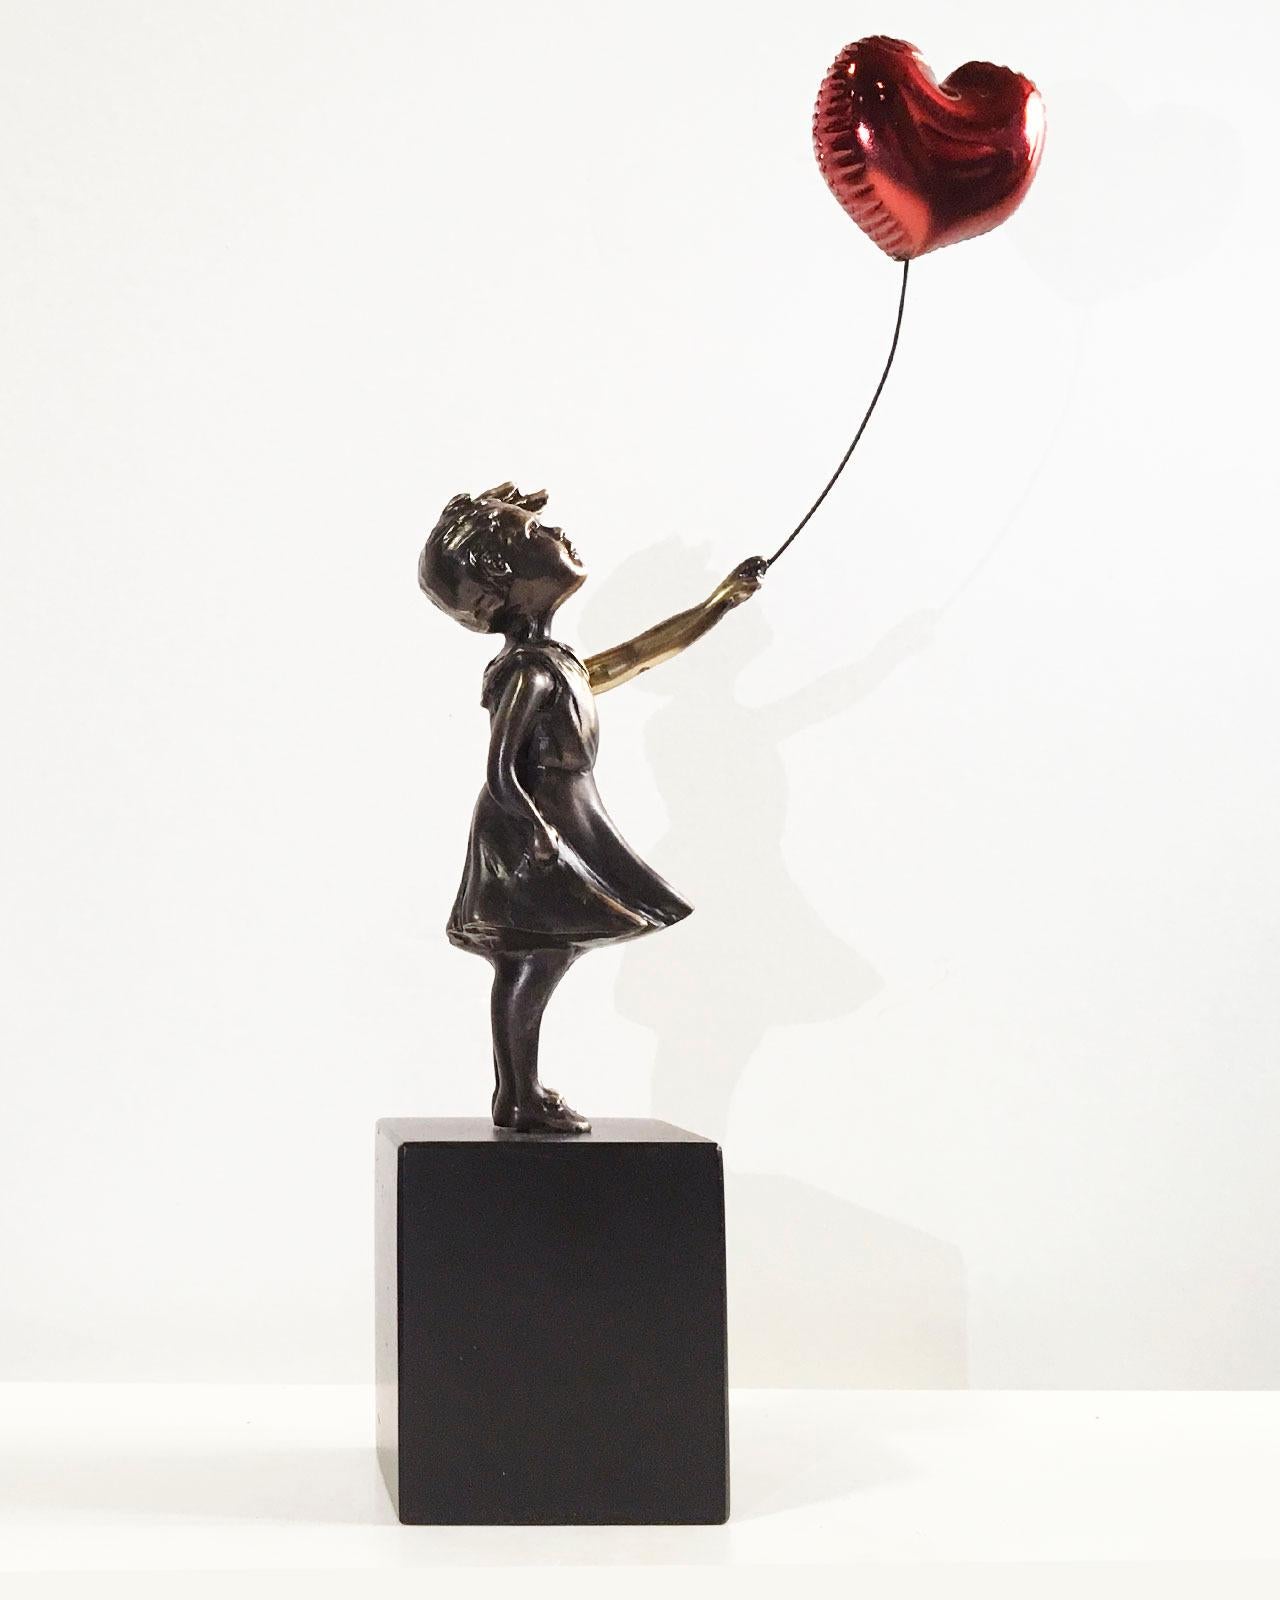 Street Art Sculpture "Girl with red balloon" by Miguel Guía.
This sculpture is made by lost wax bronze casting.
Limited edition of 299 works.
The base is included in the price.
The dimensions given include the base.
This Sculpture are copyrighted